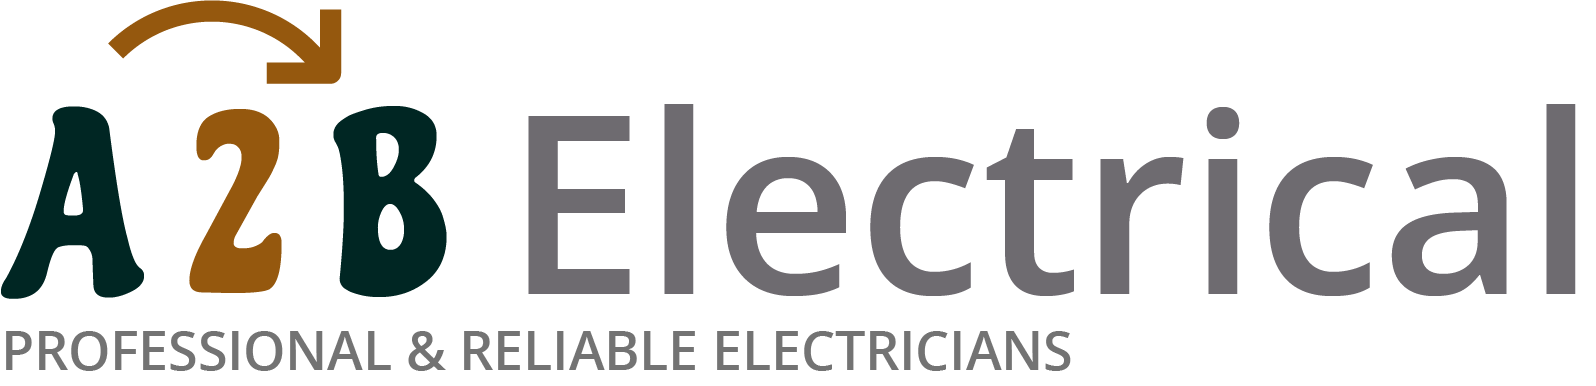 If you have electrical wiring problems in Bexley, we can provide an electrician to have a look for you. 